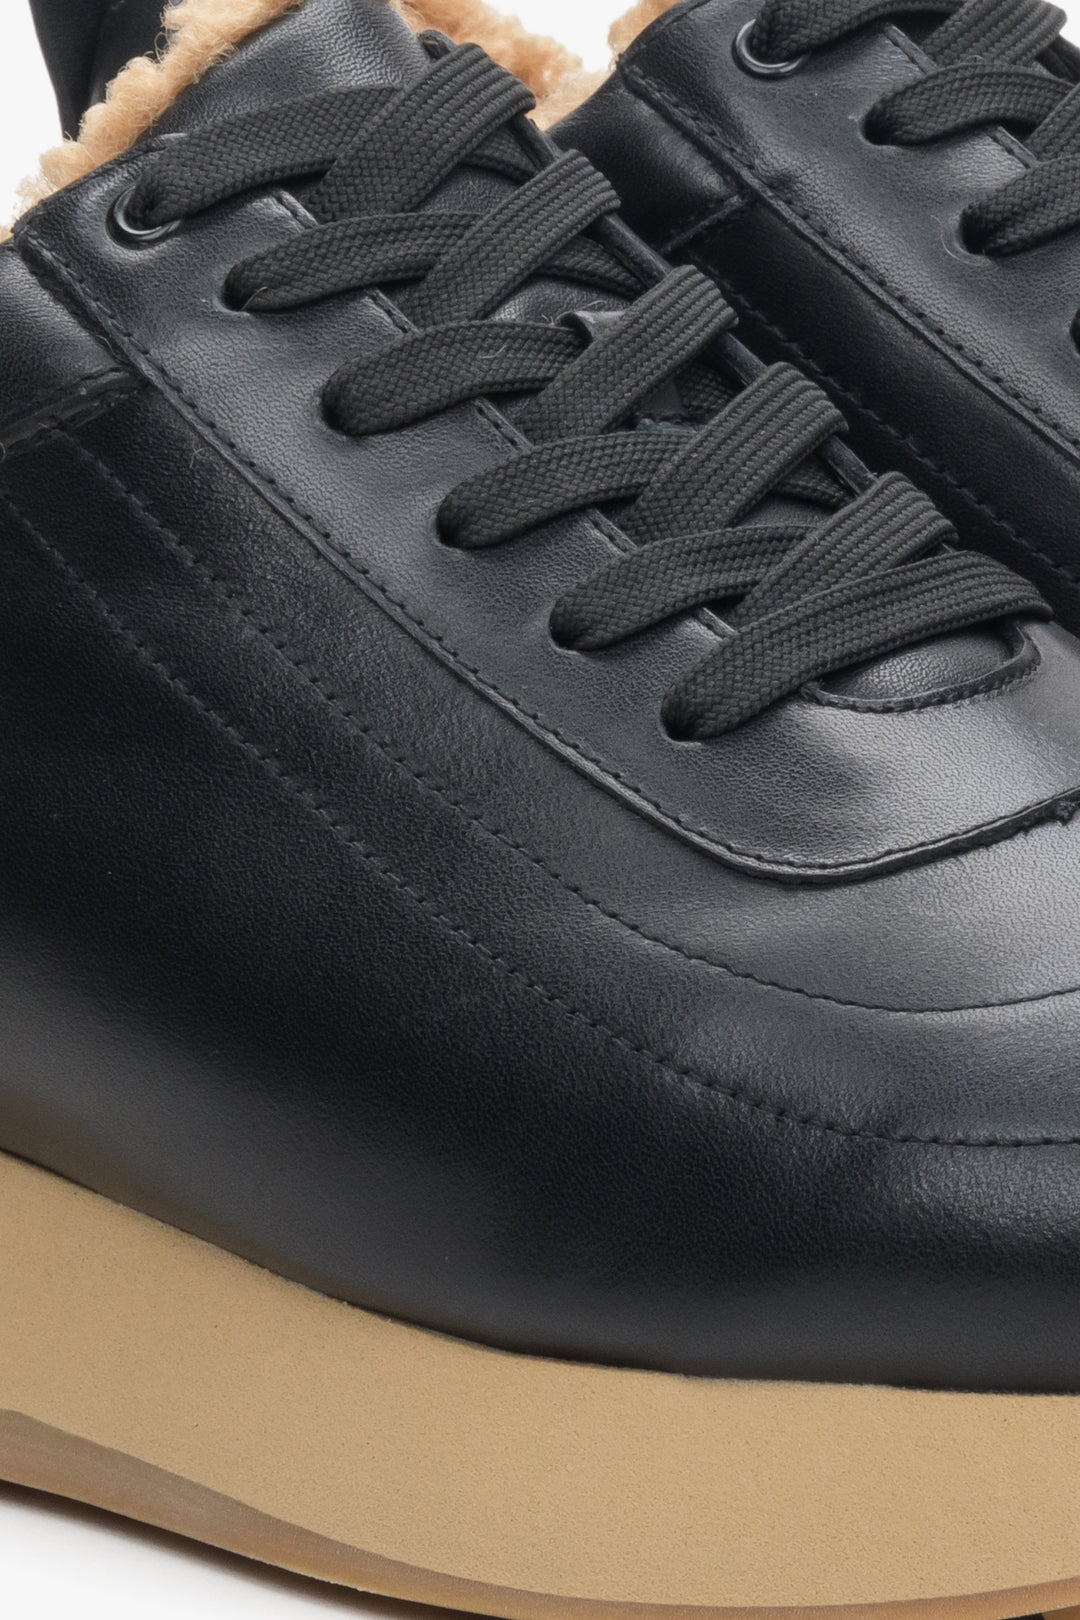 Women's leather sneakers by Estro in black for winter.